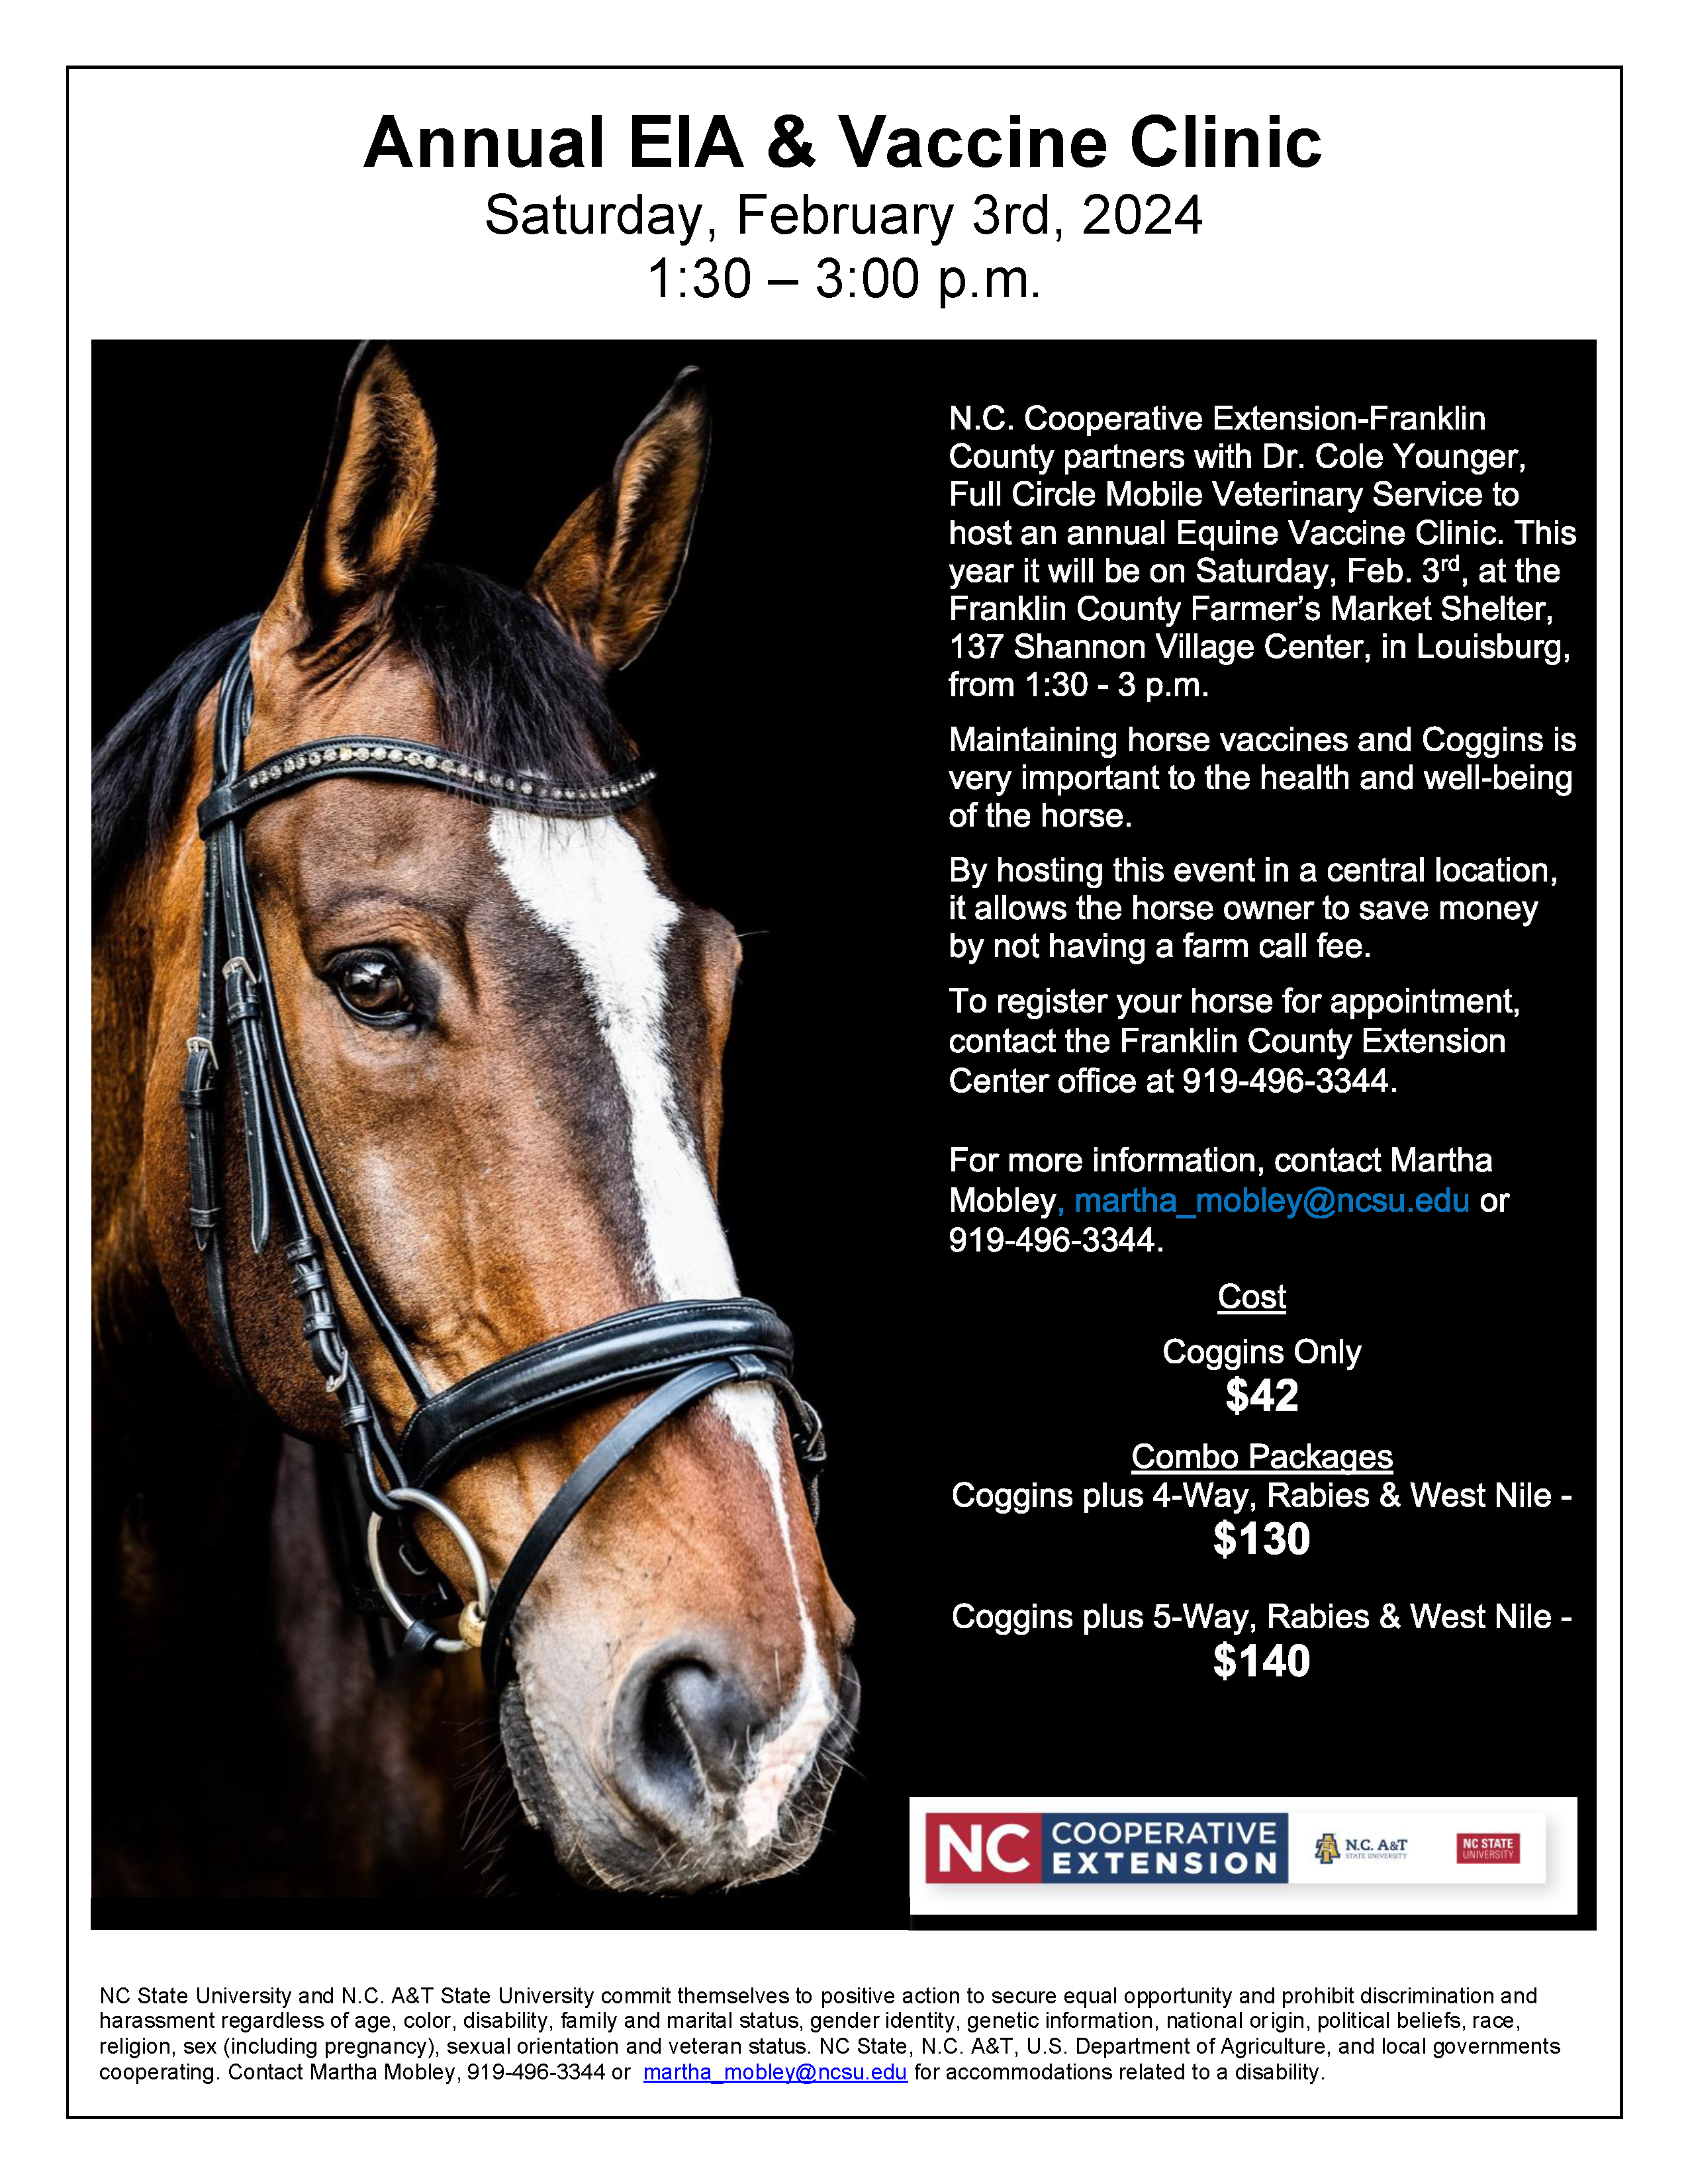 2024 Horse EIA-Coggins Clinic flyer with registration info., date, time, prices head shot image of a black horse wearing a bridle